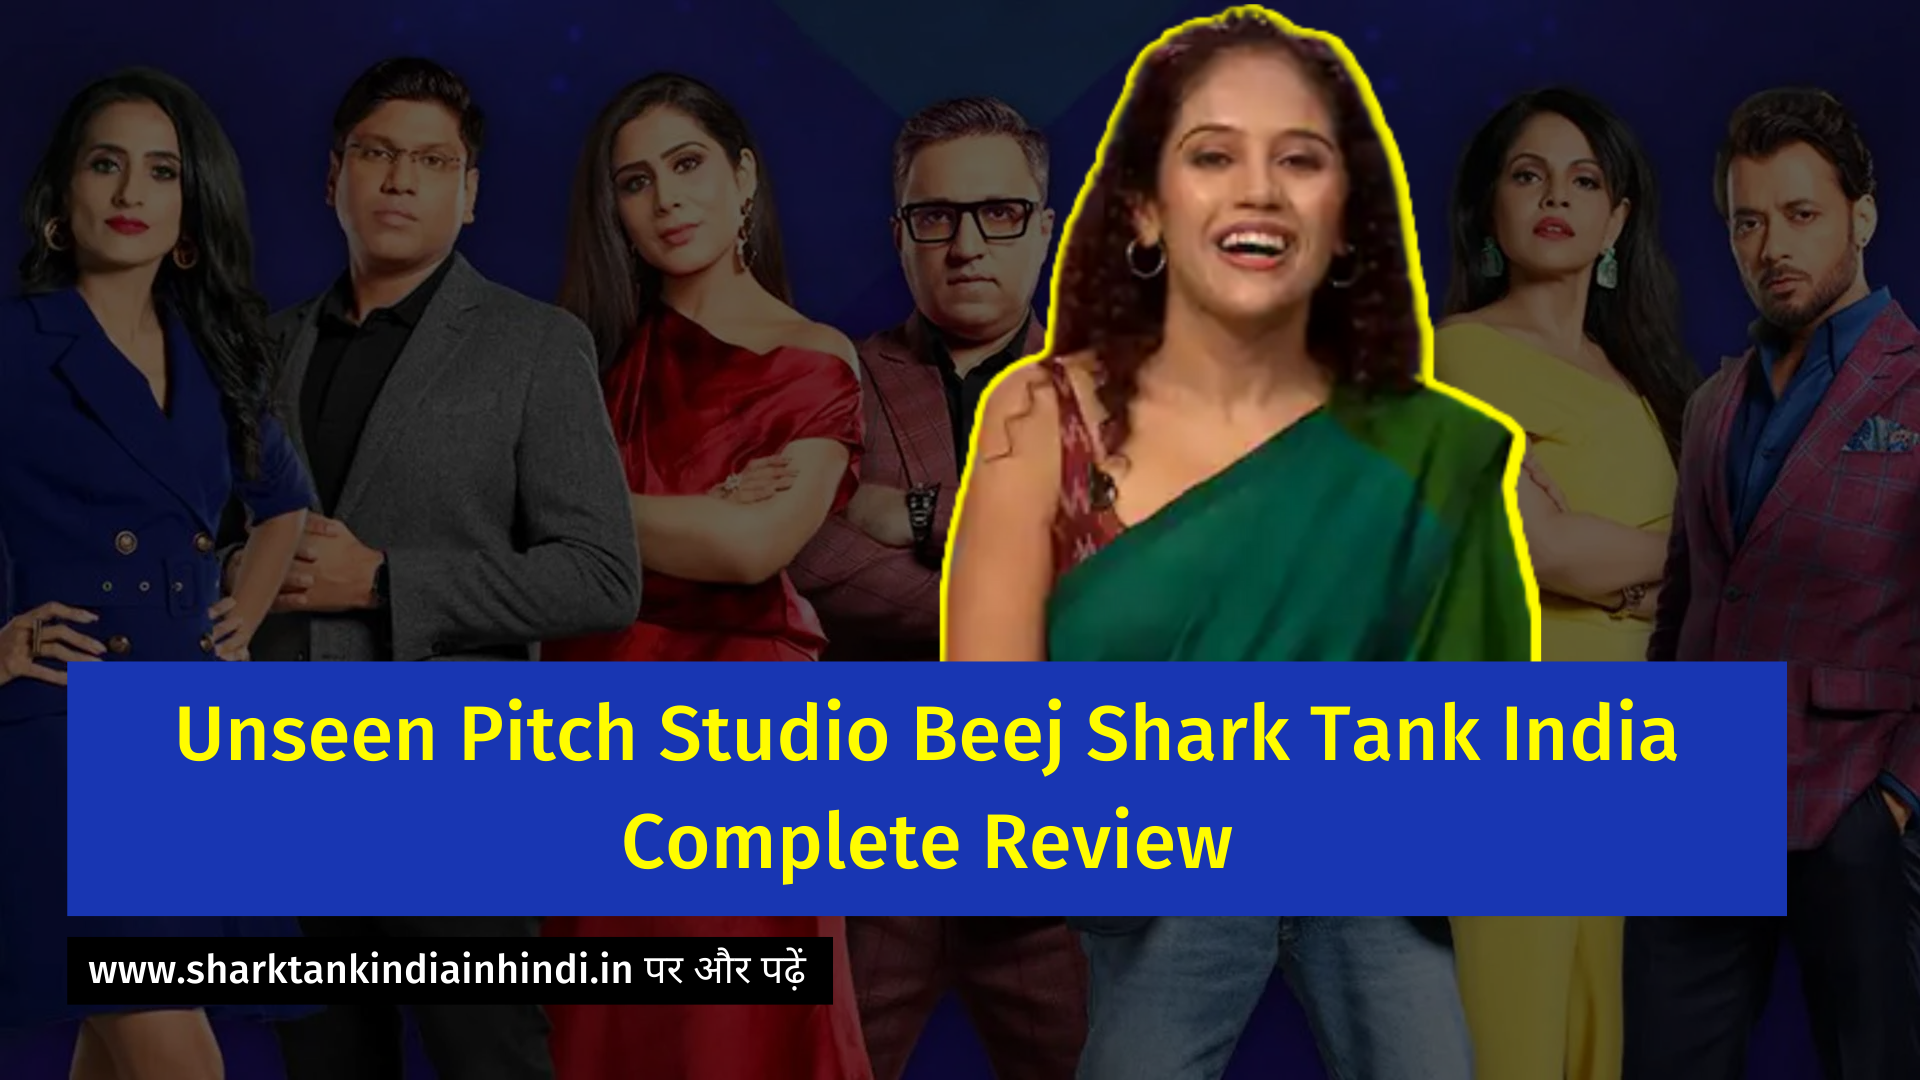 Unseen Pitch Studio Beej Shark Tank India Complete Review